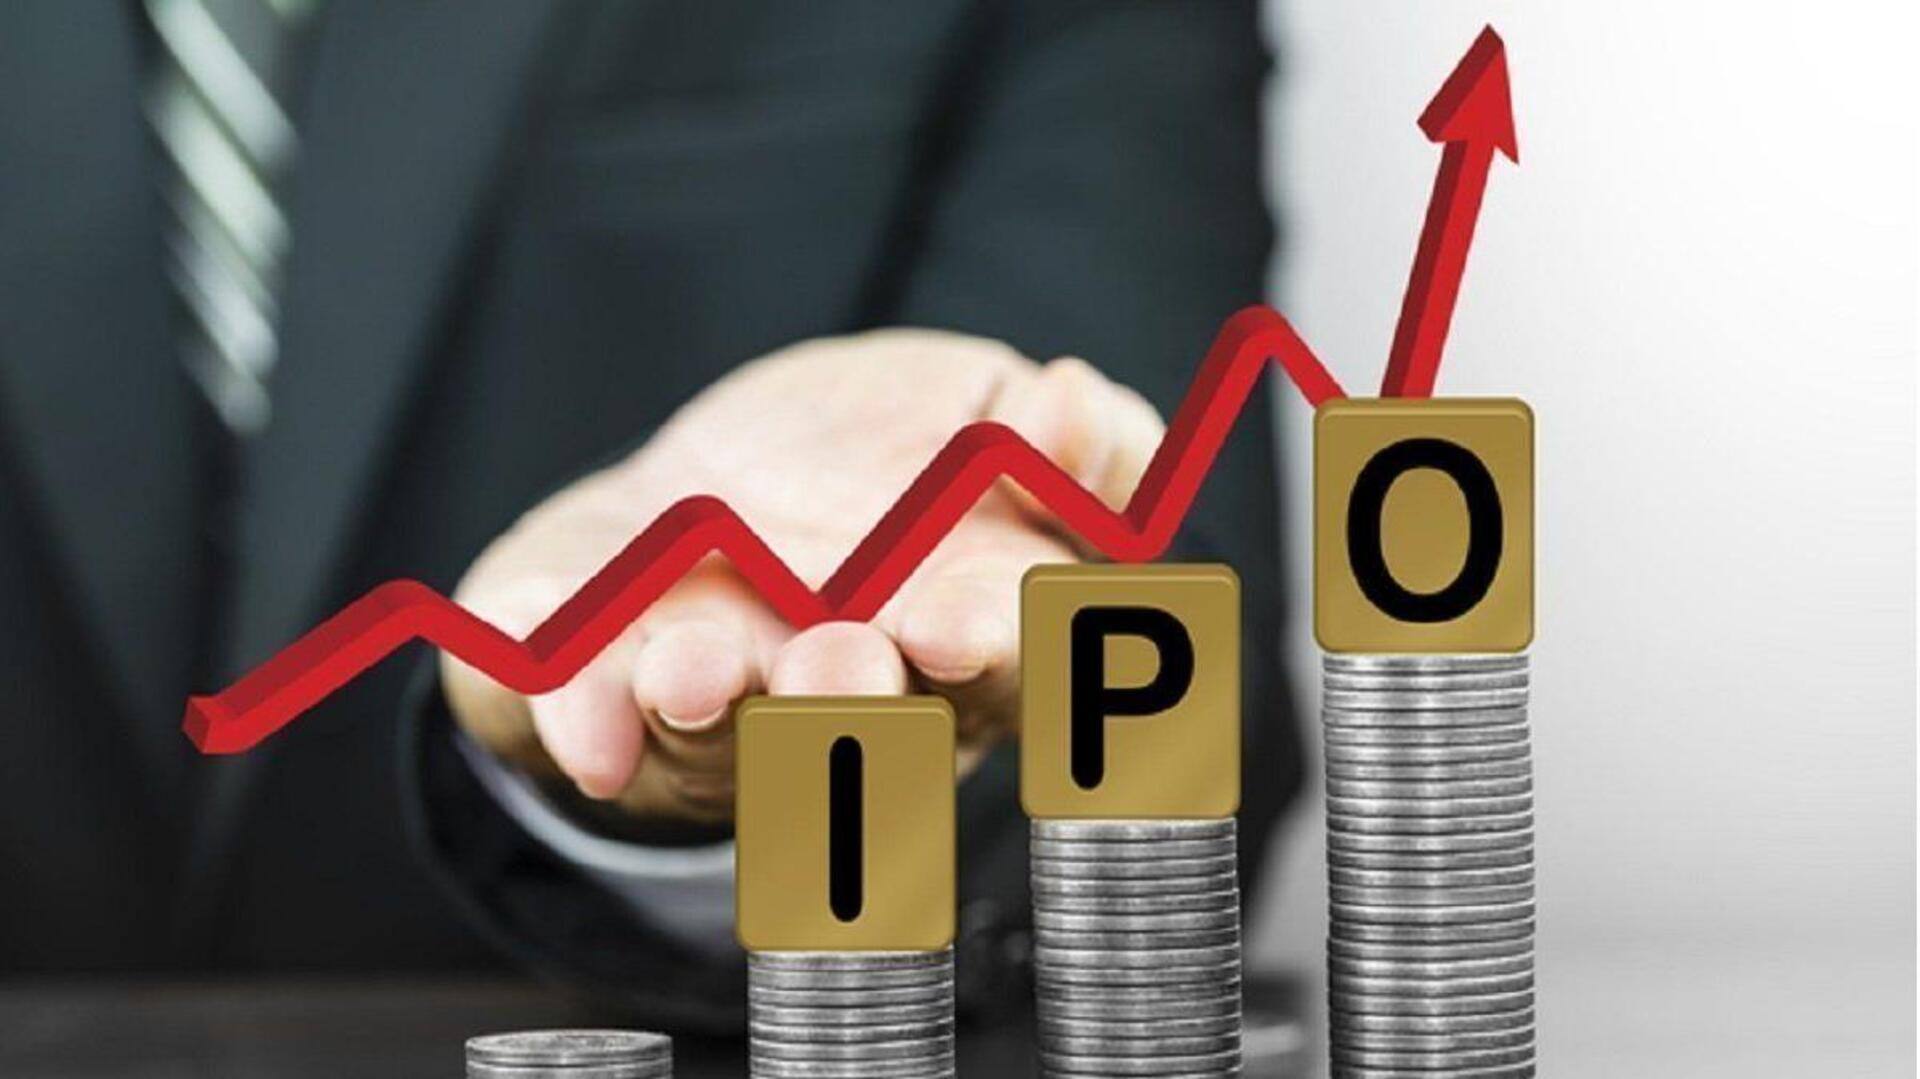 Diwali IPO rush: Multiple companies gearing up for public listings